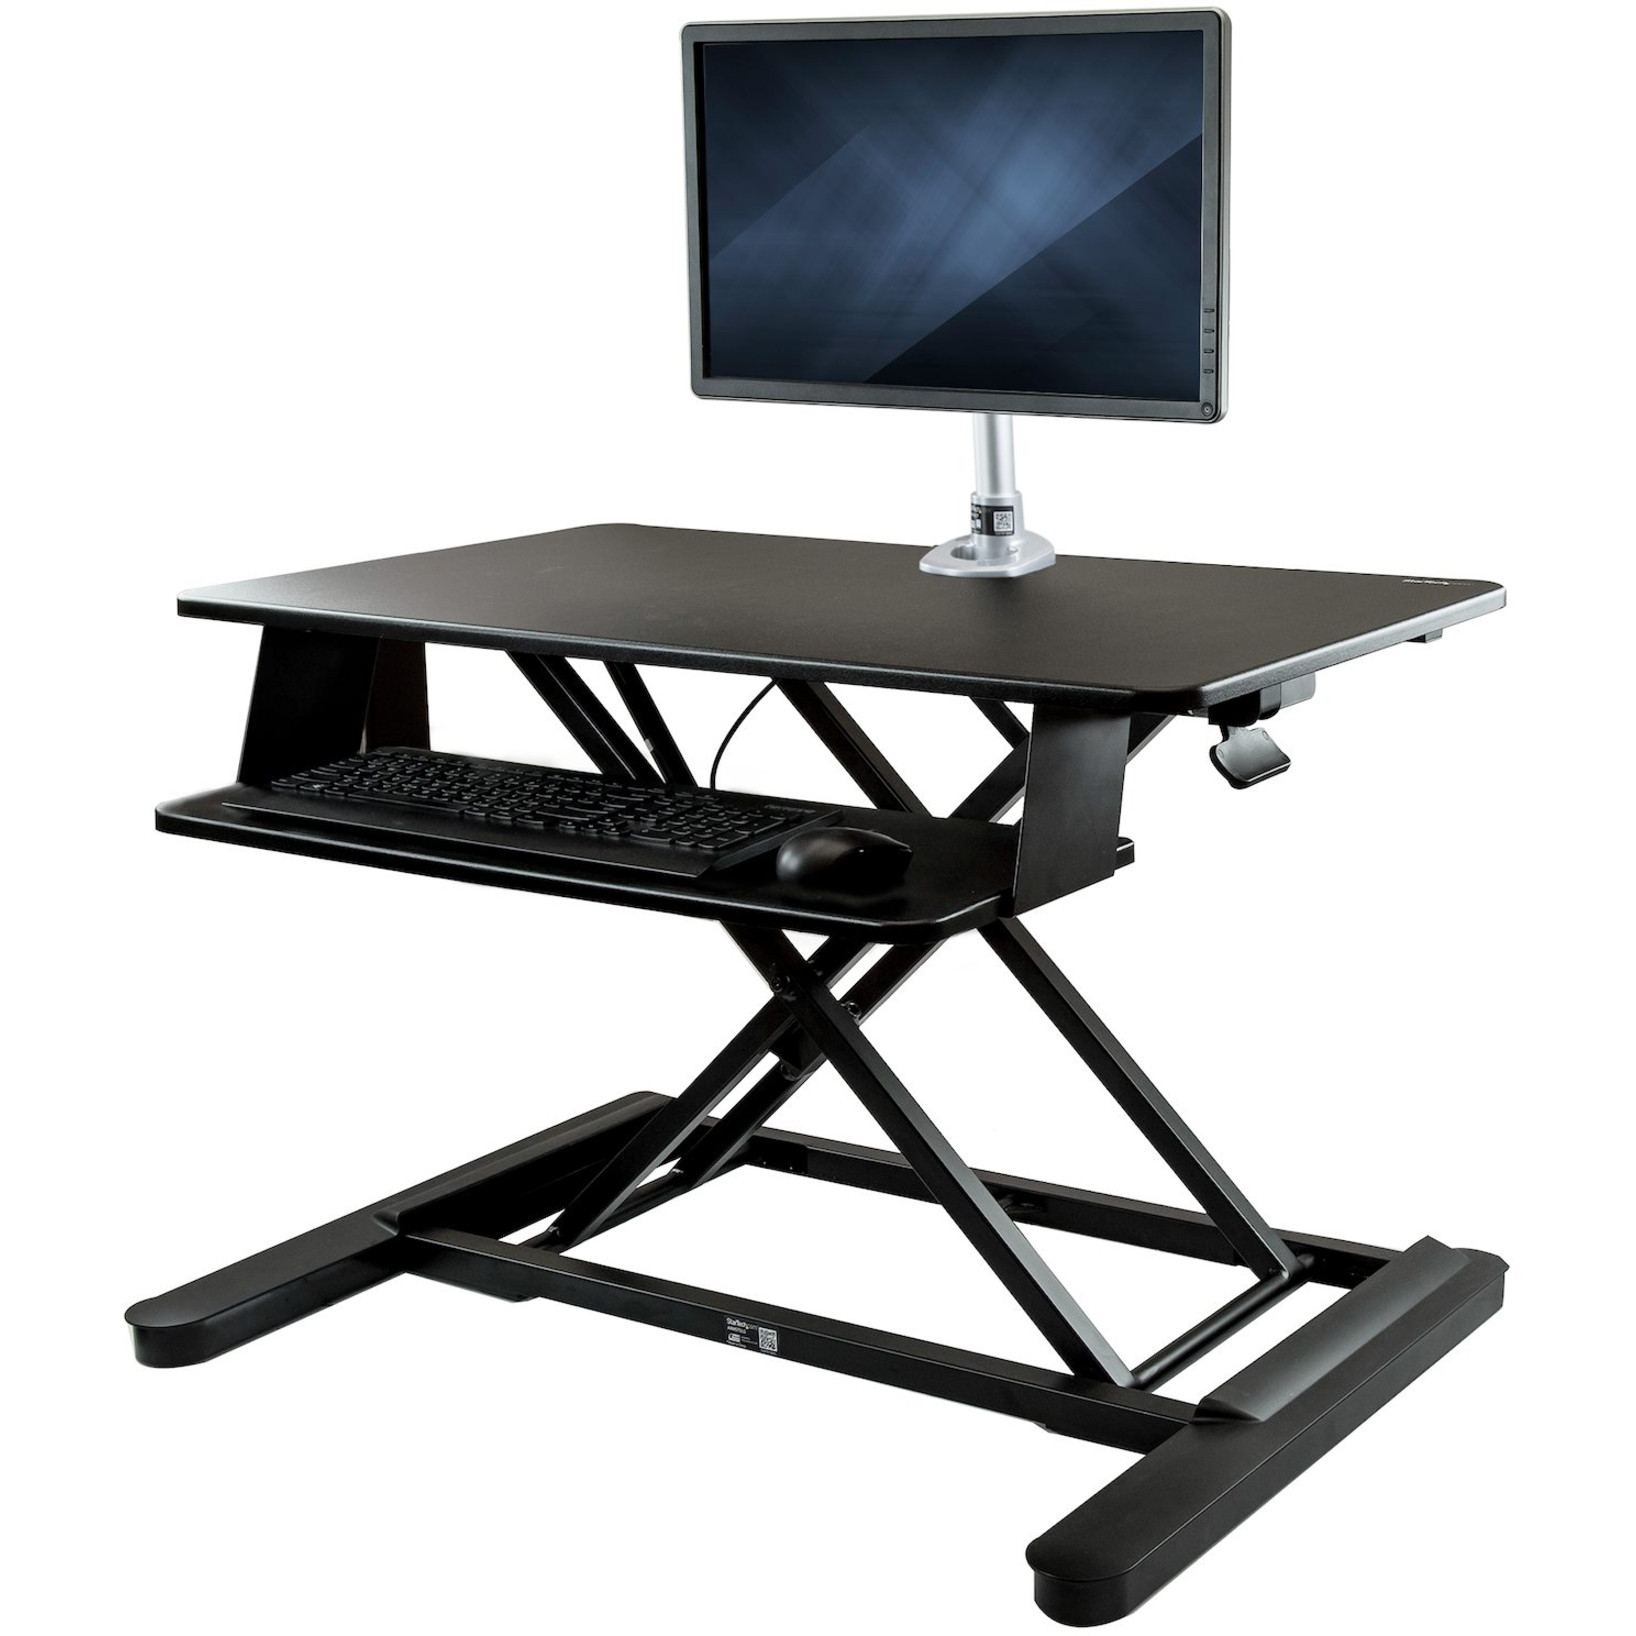 Startech .com Sit-Stand Desk Converter with Monitor Arm35″ WideHeight Adjustable Standing Desk SolutionArm for up to 30″ MonitorT… BNDSTSLGPVT